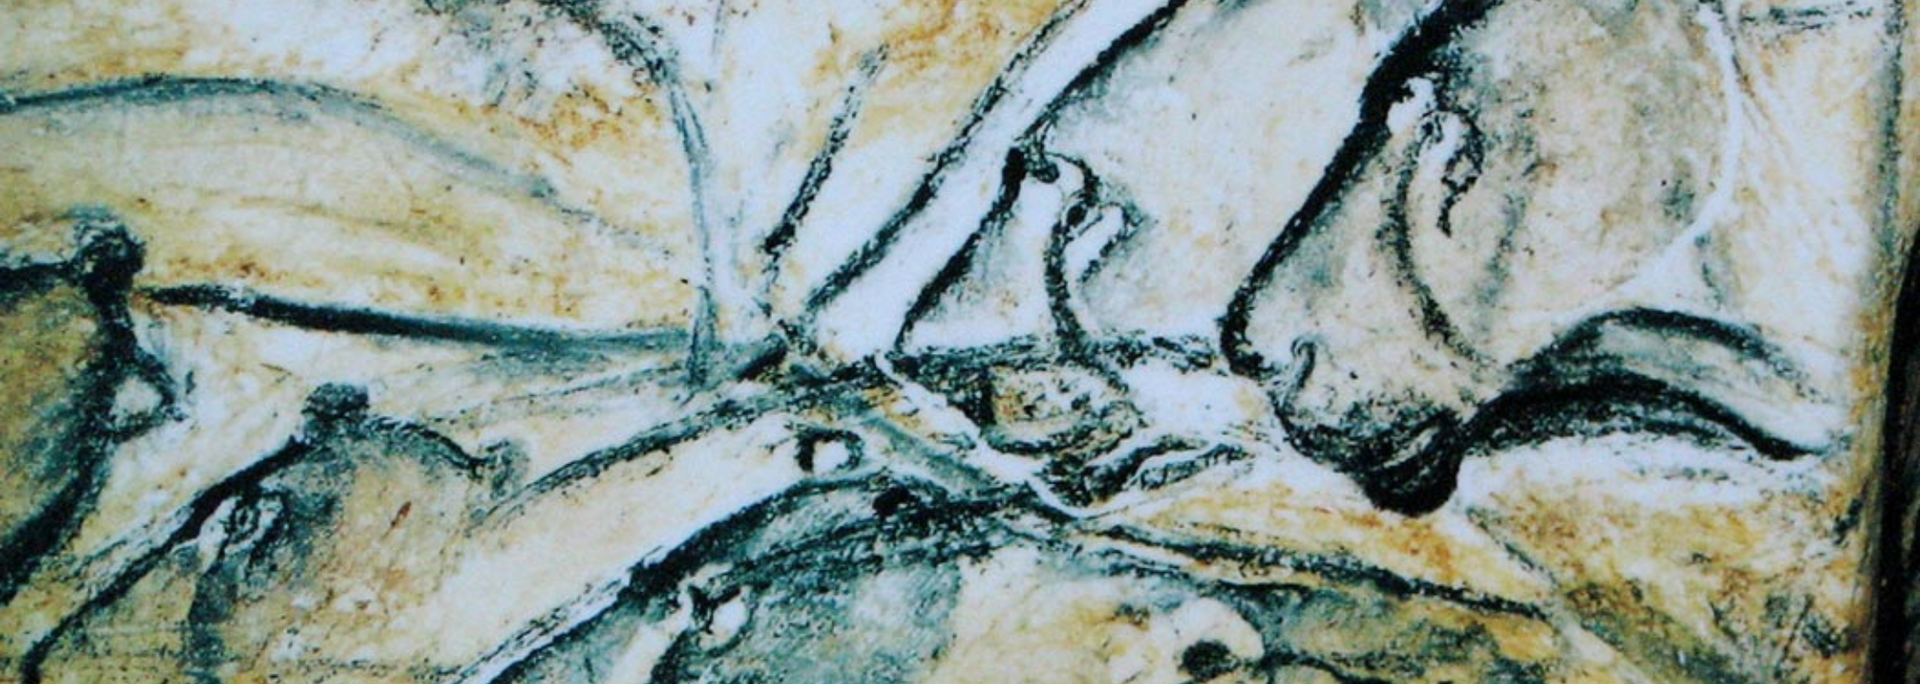 Picture of the Chauvet Cave Paintings